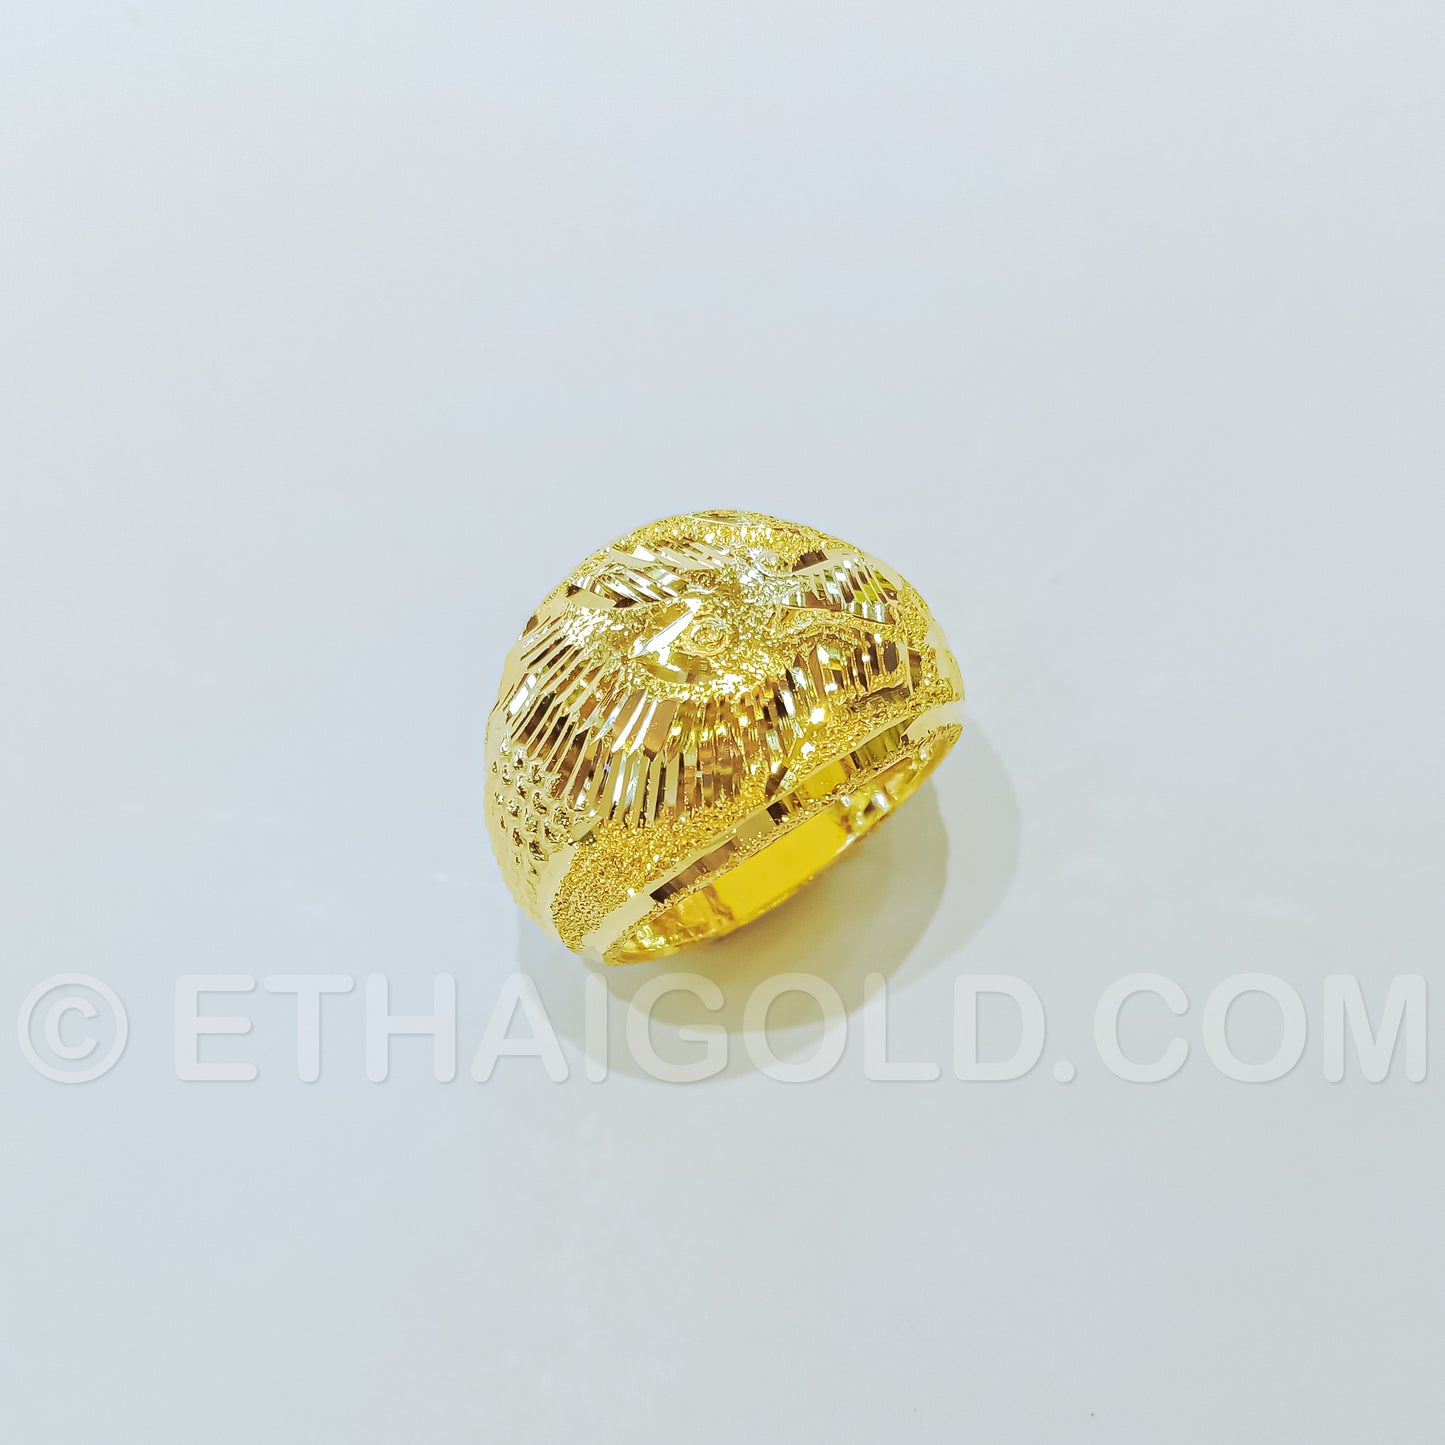 1 BAHT POLISHED SPARKLING DIAMOND-CUT HOLLOW LARGE DRAGON RING IN 23K GOLD (ID: R1401B)